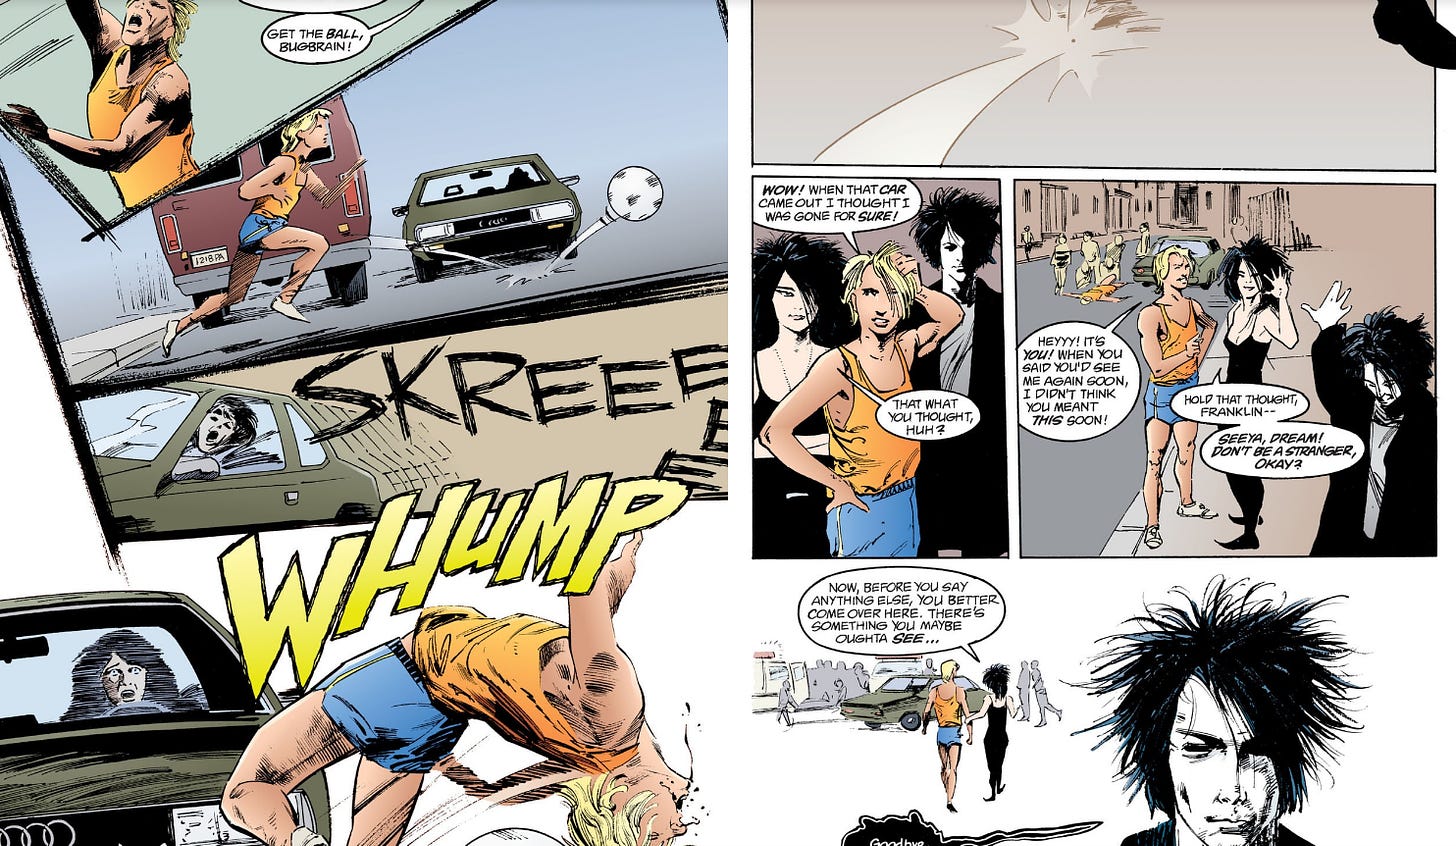 two panels of a digital comic edition of sandman, showing a teenage boy in an orange shirt getting struck by a car, against a white background